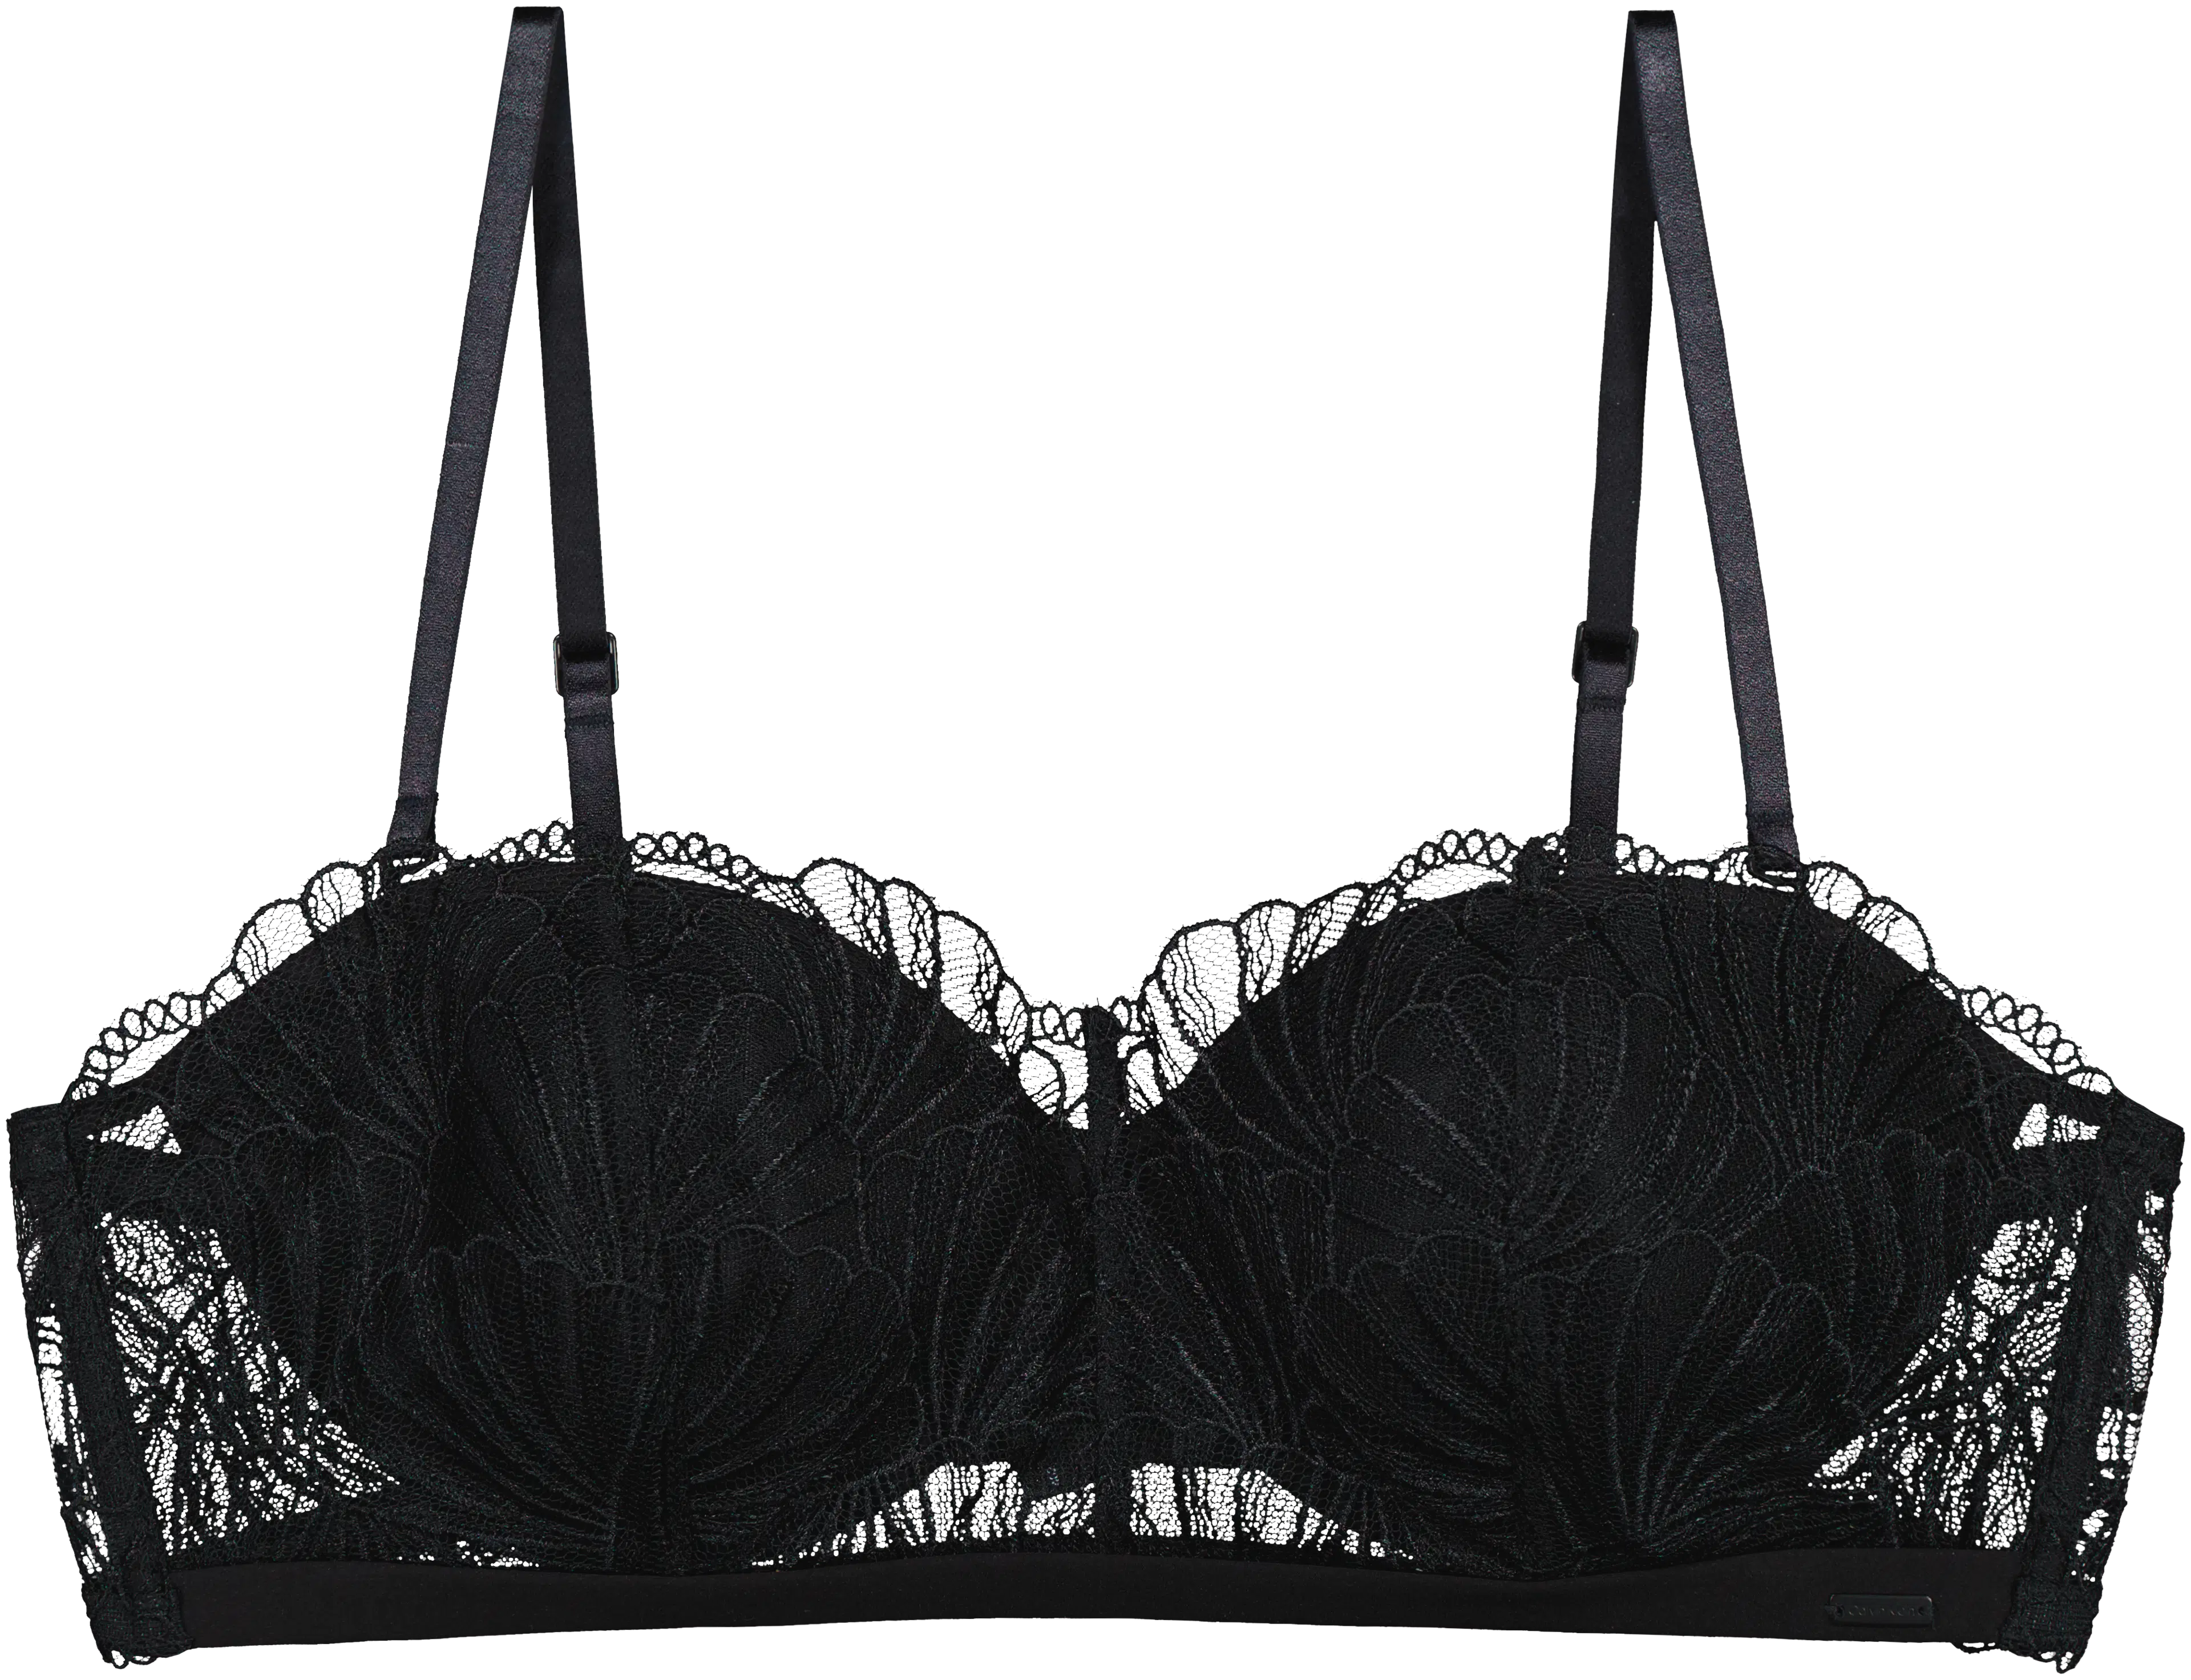 Calvin Klein CK Black Embroidery Lightly Lined bandeauliivit